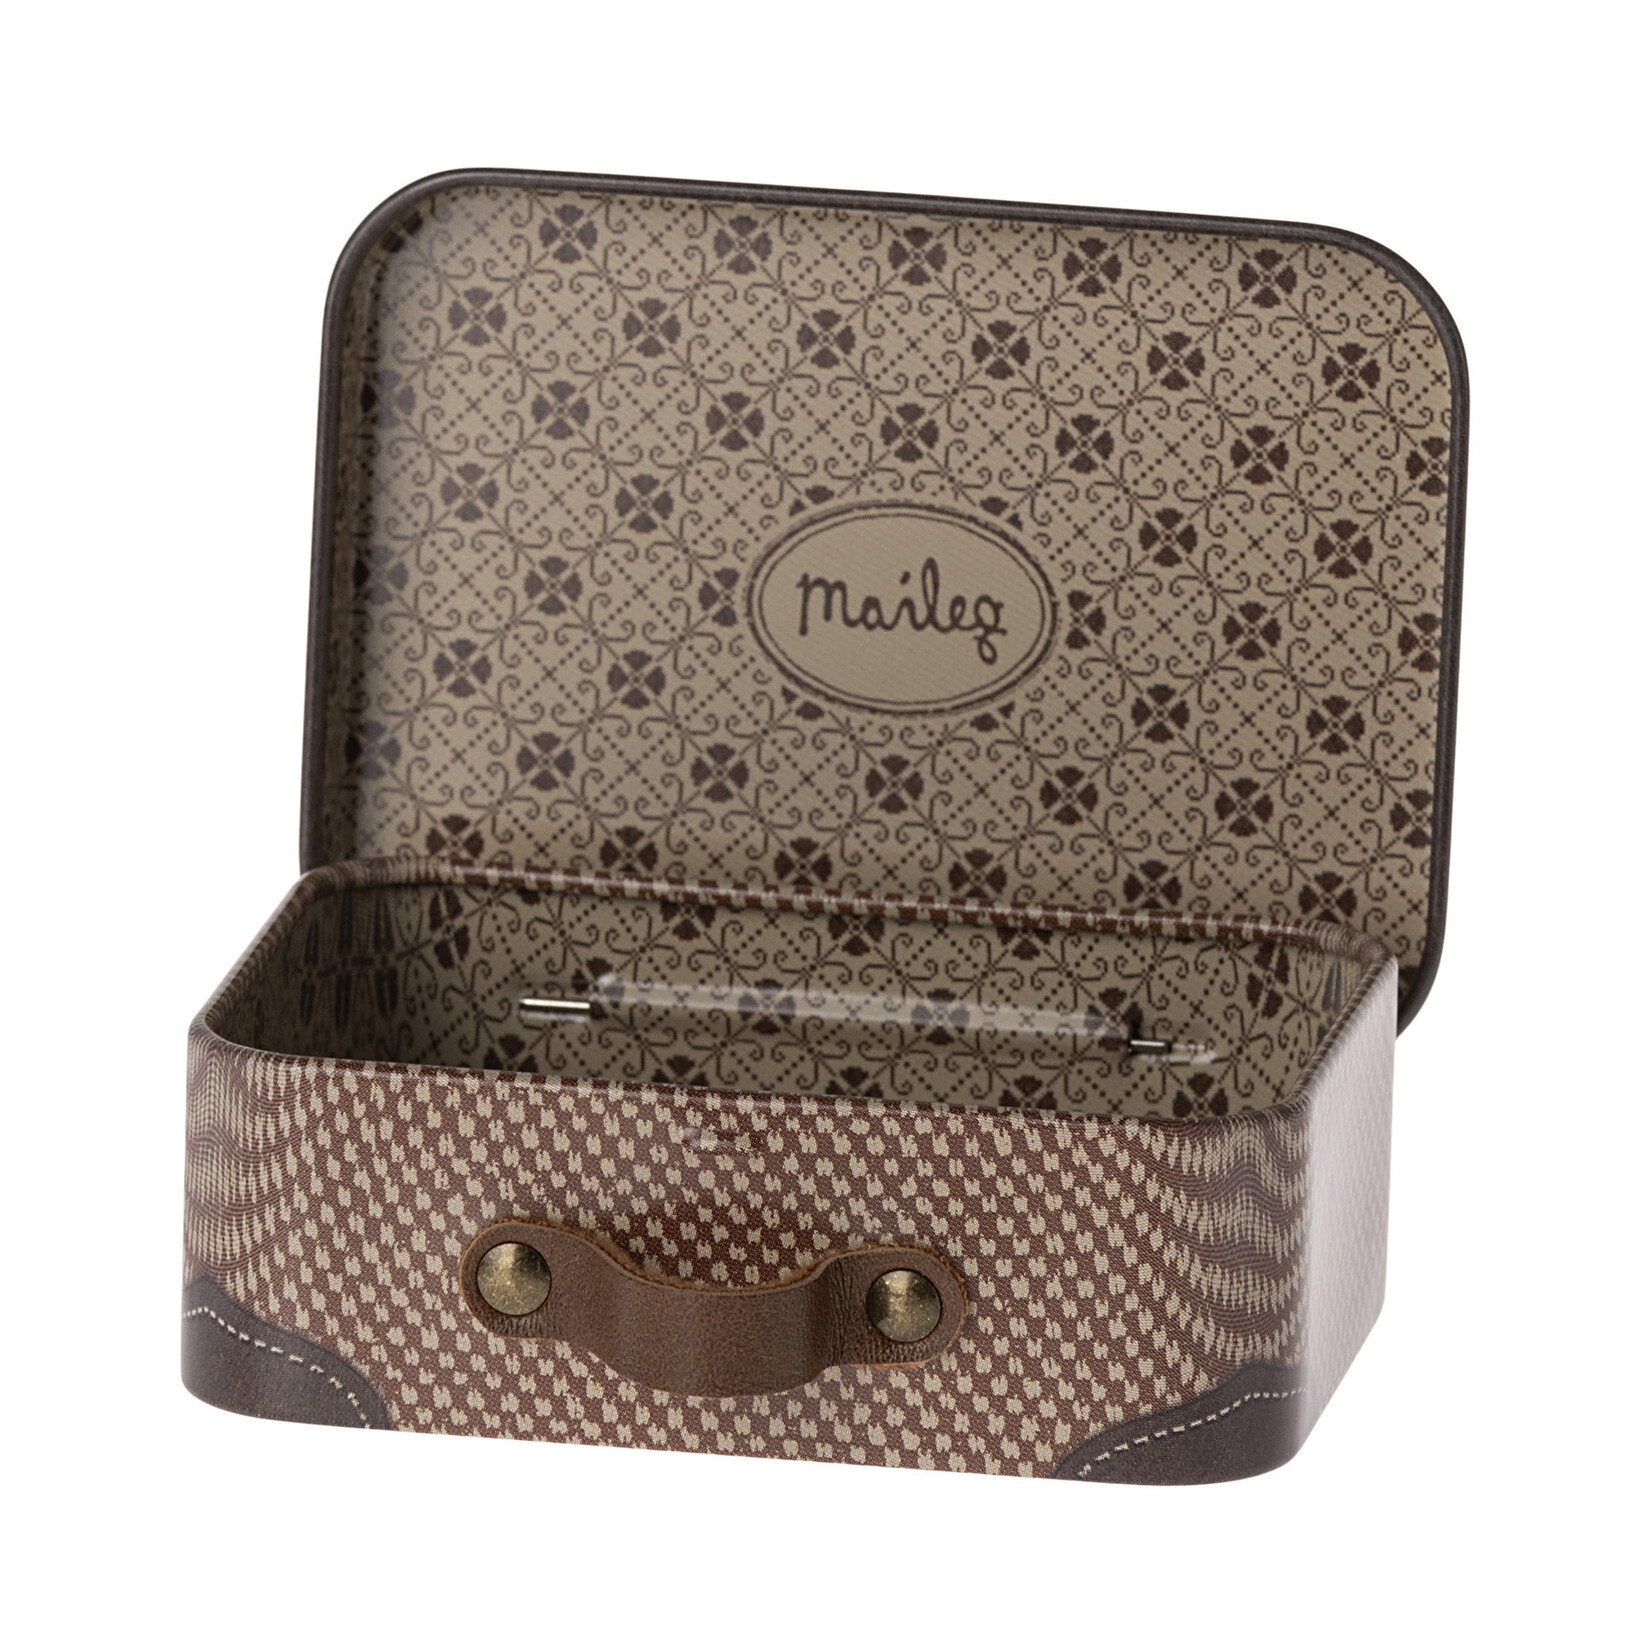 Maileg PRE ORDER Maileg Brown Travel Suitcase Micro - Estimated arrival mid/end May